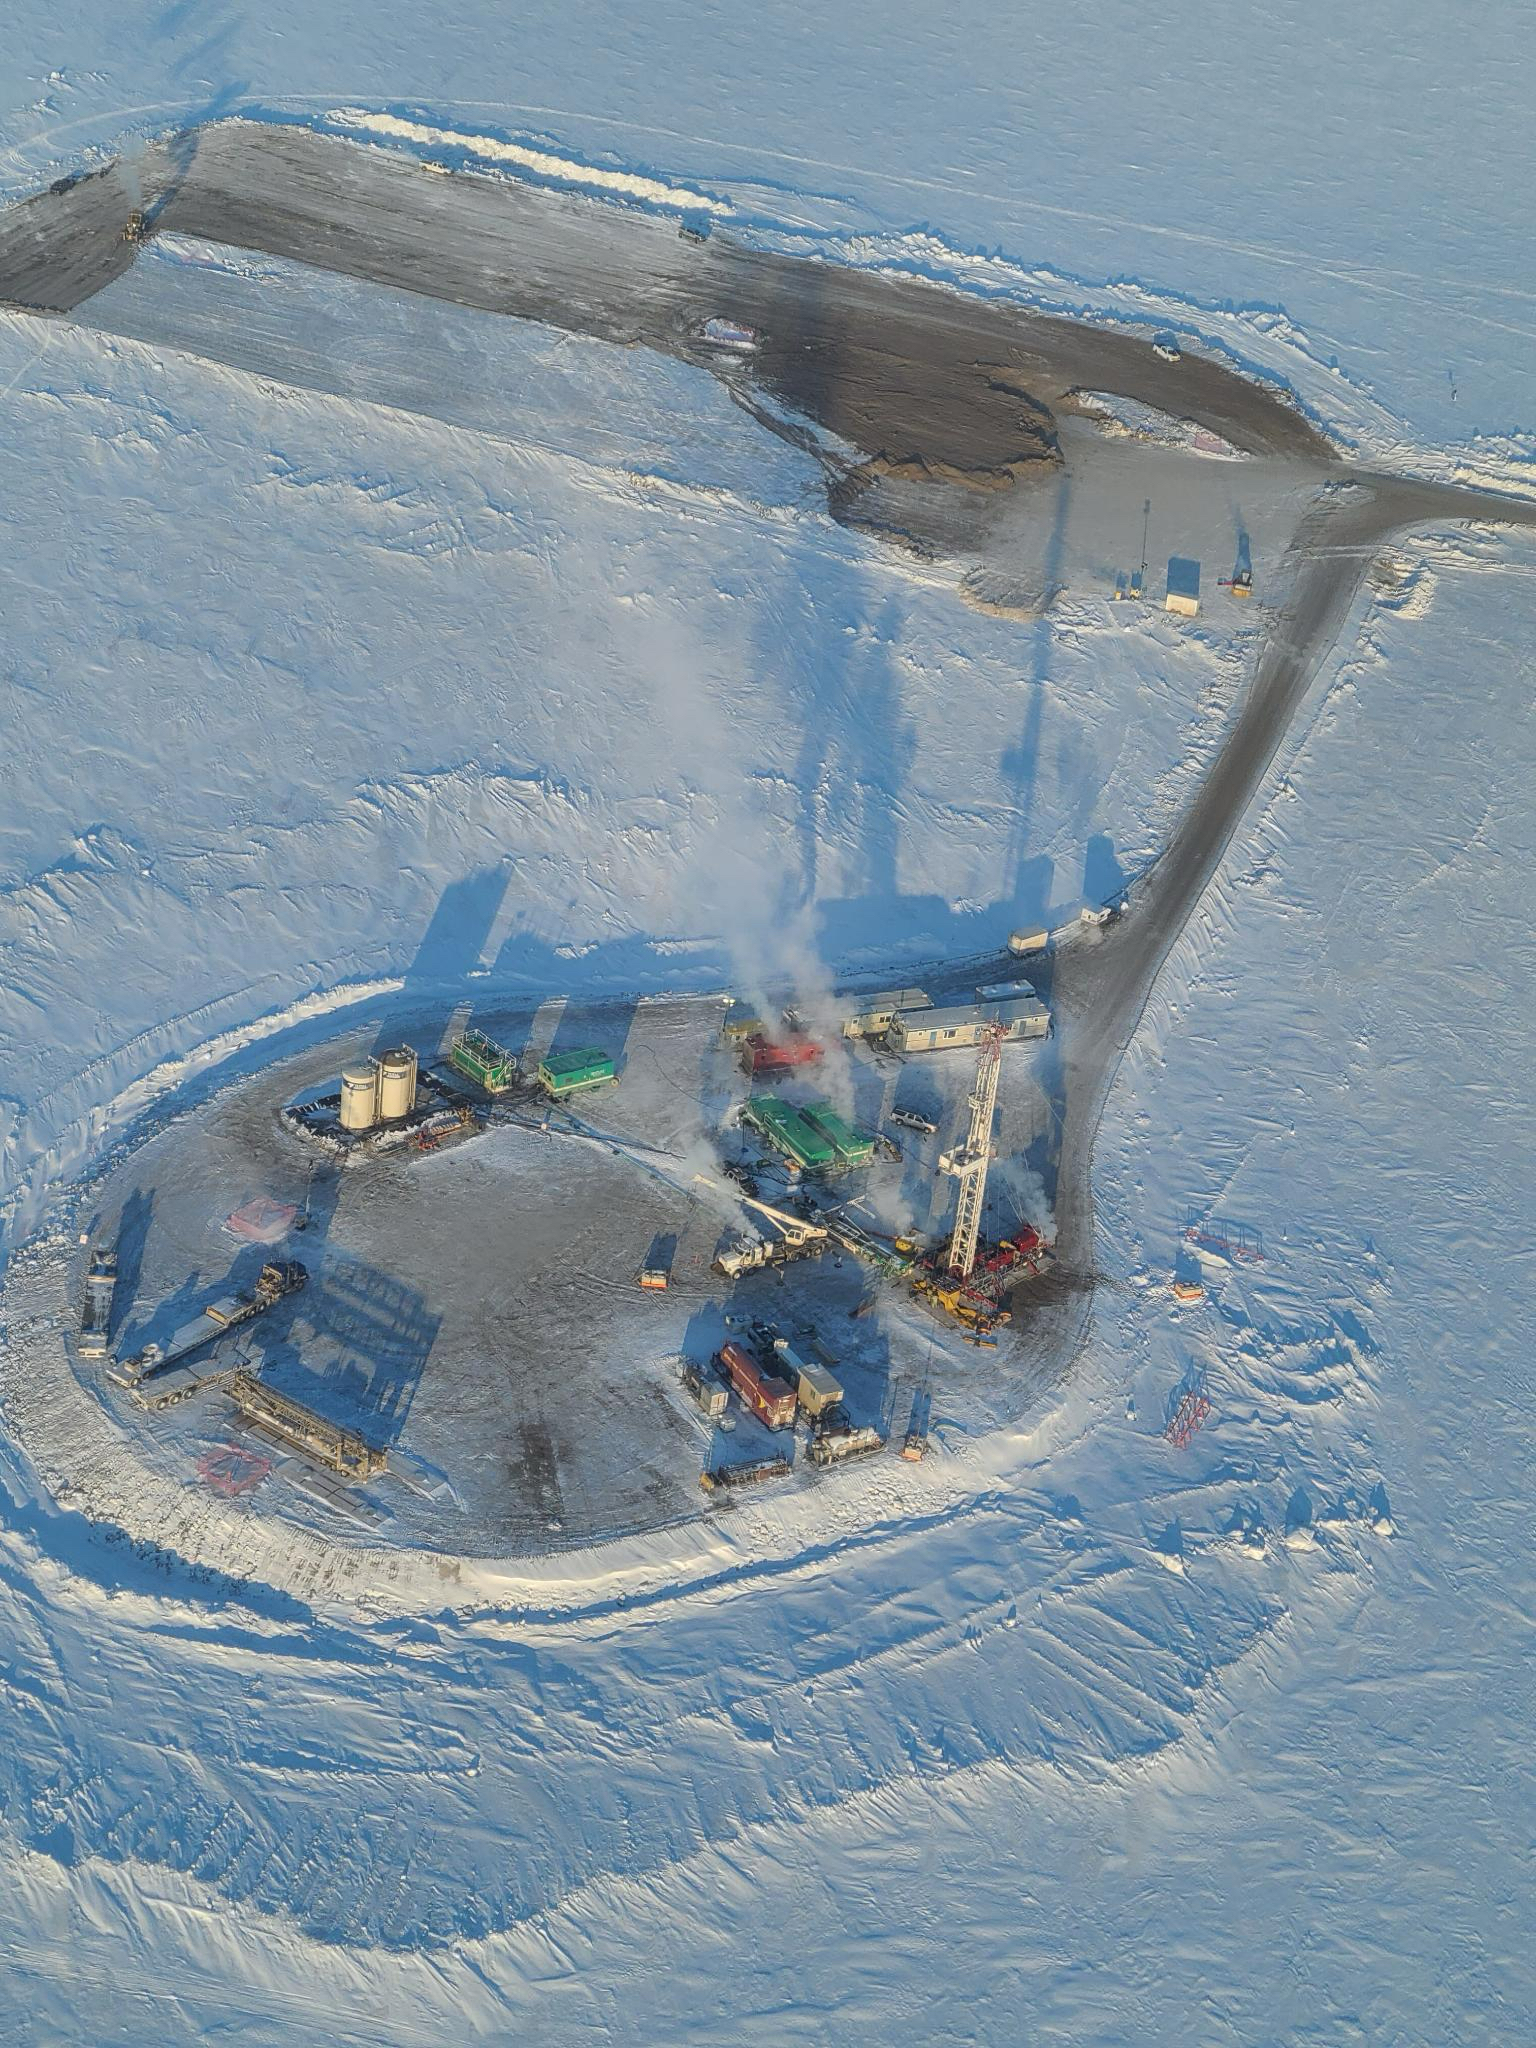 Inuvialuit Energy Security Project Receives Final Regulatory Approval